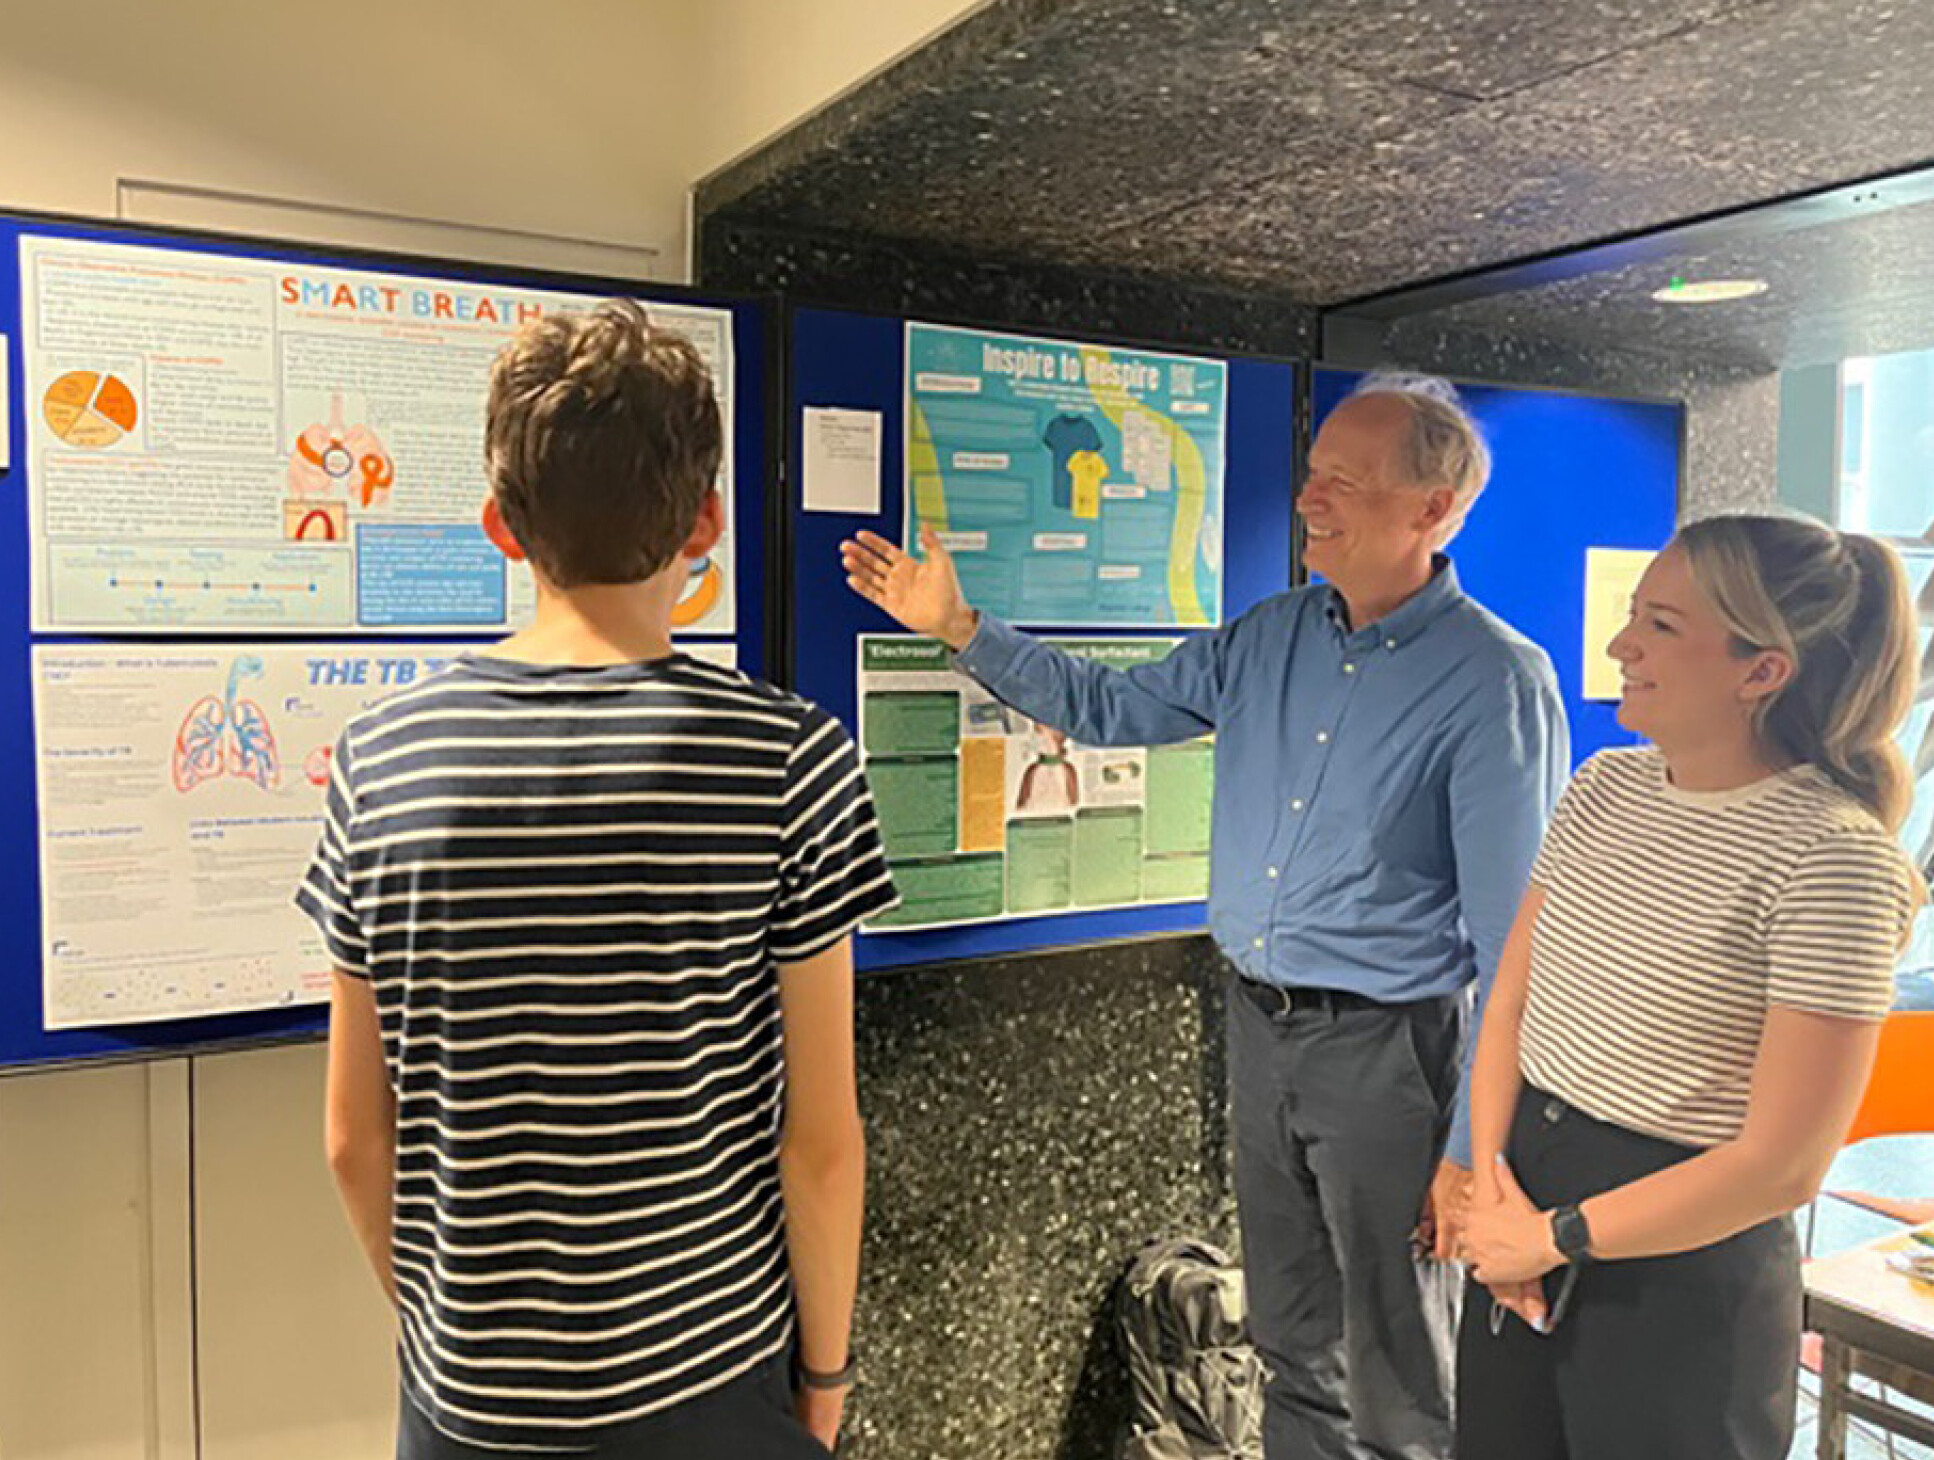 Dorian Haskard and Courtney Chatterton-Bartley discuss last year’s winning posters with a visitor.